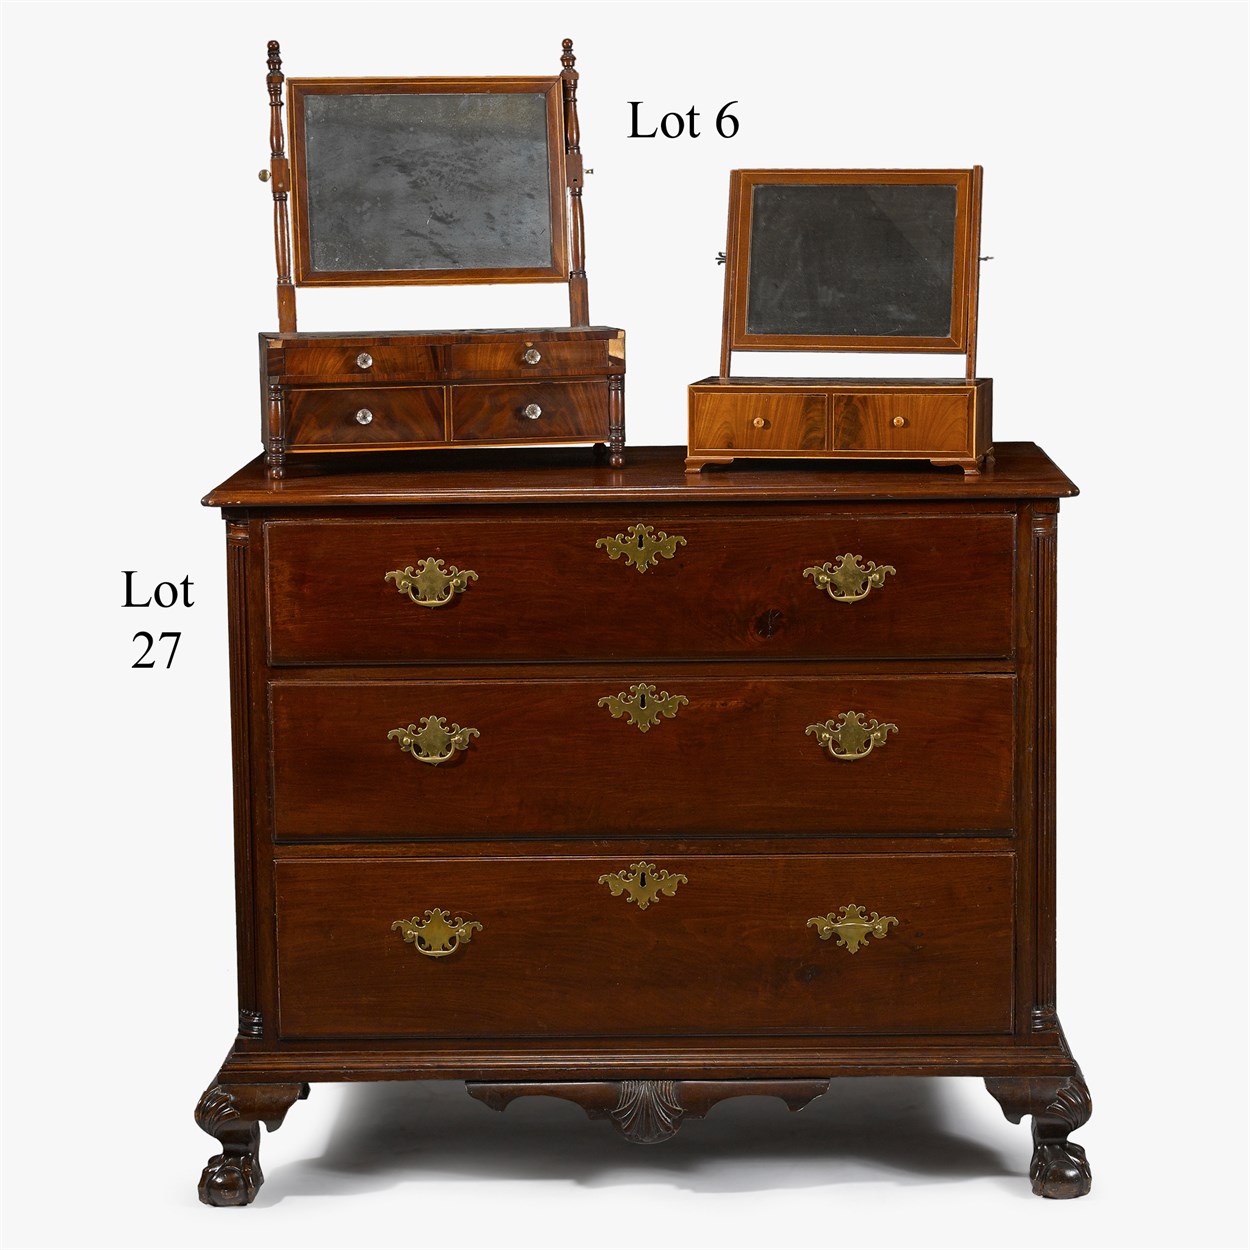 Lot 27 - Chippendale-style mahogany chest of drawers